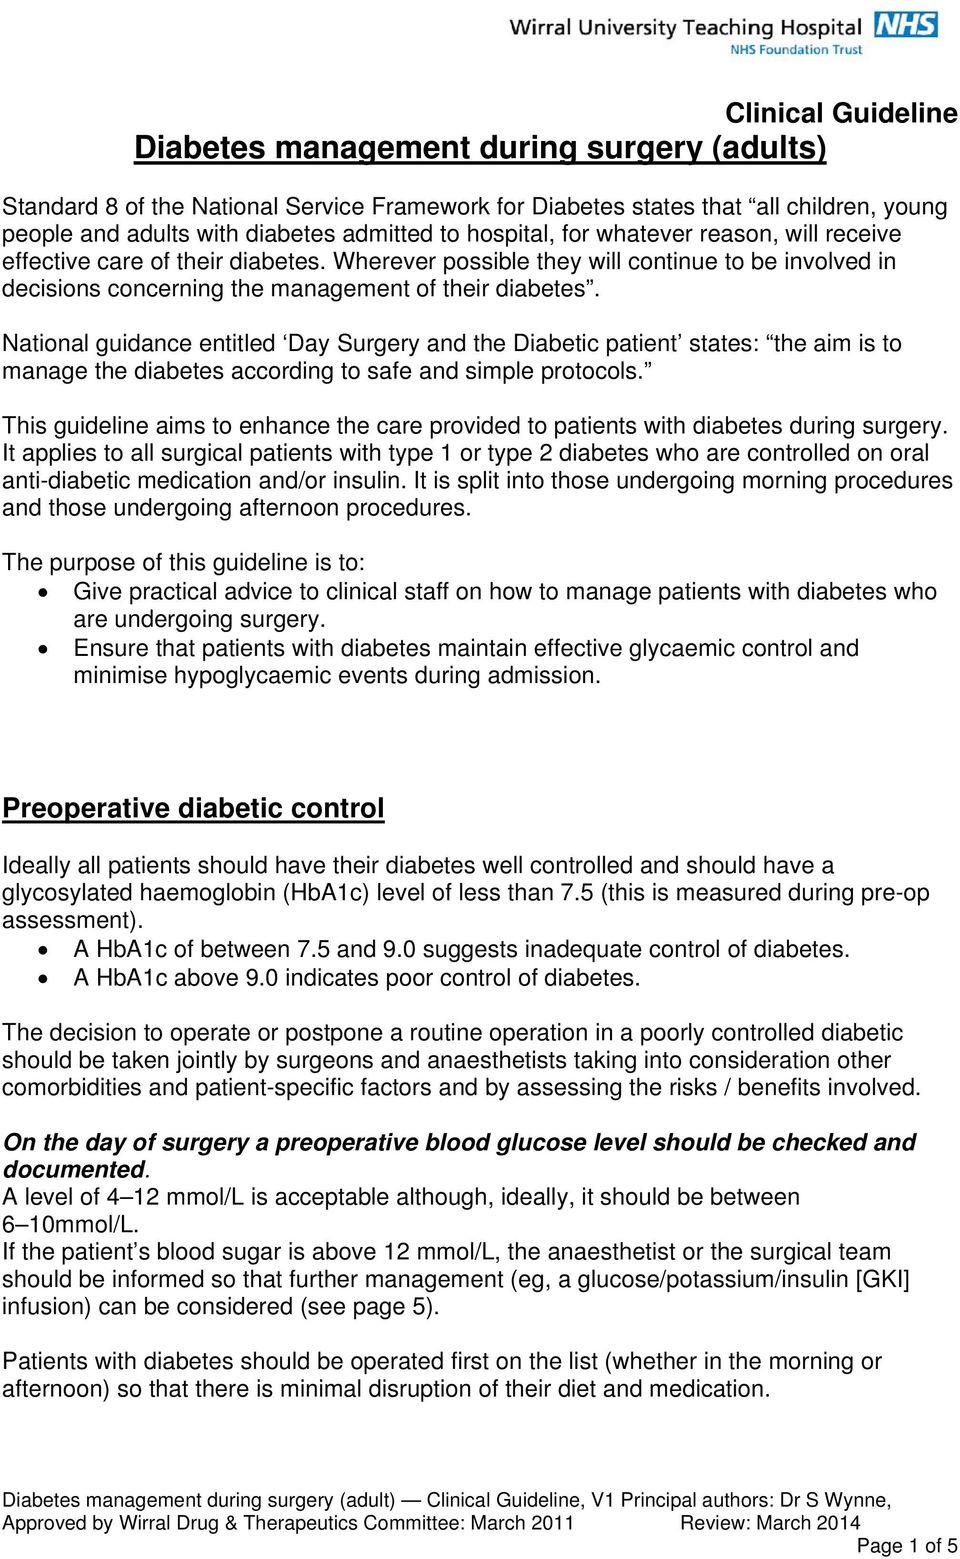 National guidance entitled Day Surgery and the Diabetic patient states: the aim is to manage the diabetes according to safe and simple protocols.